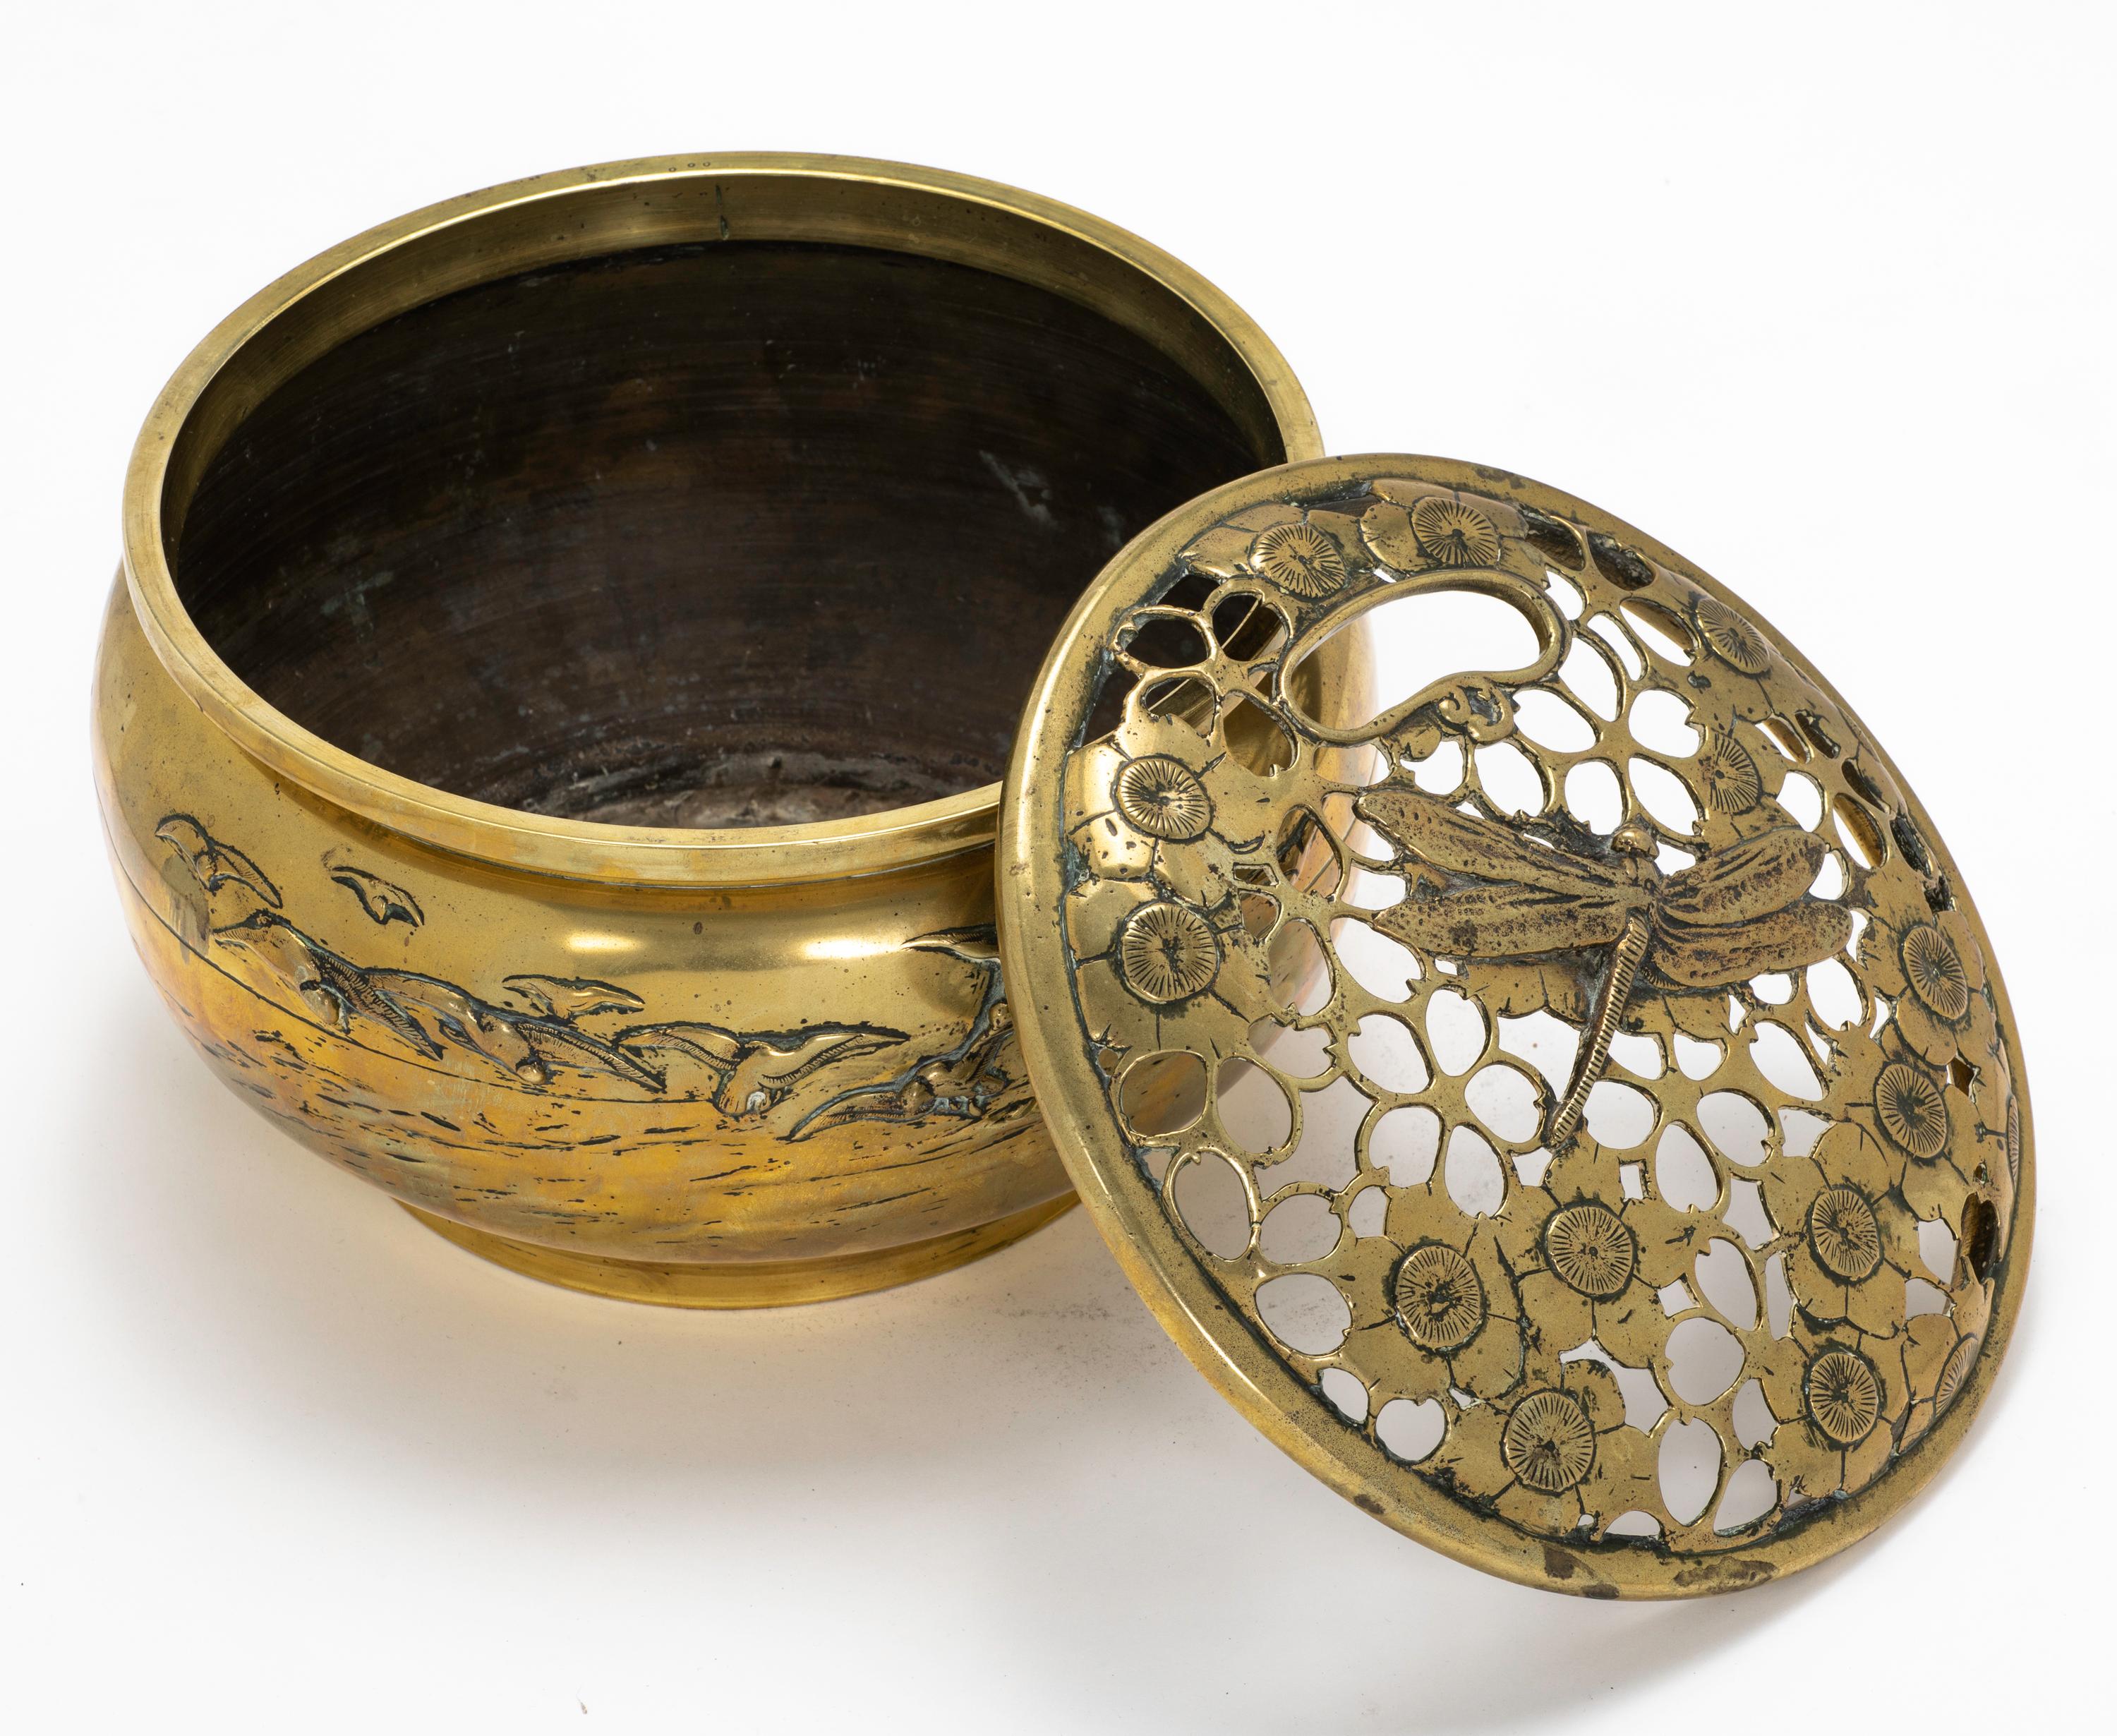  Chinese Brass Incense/Brazier For Sale 3